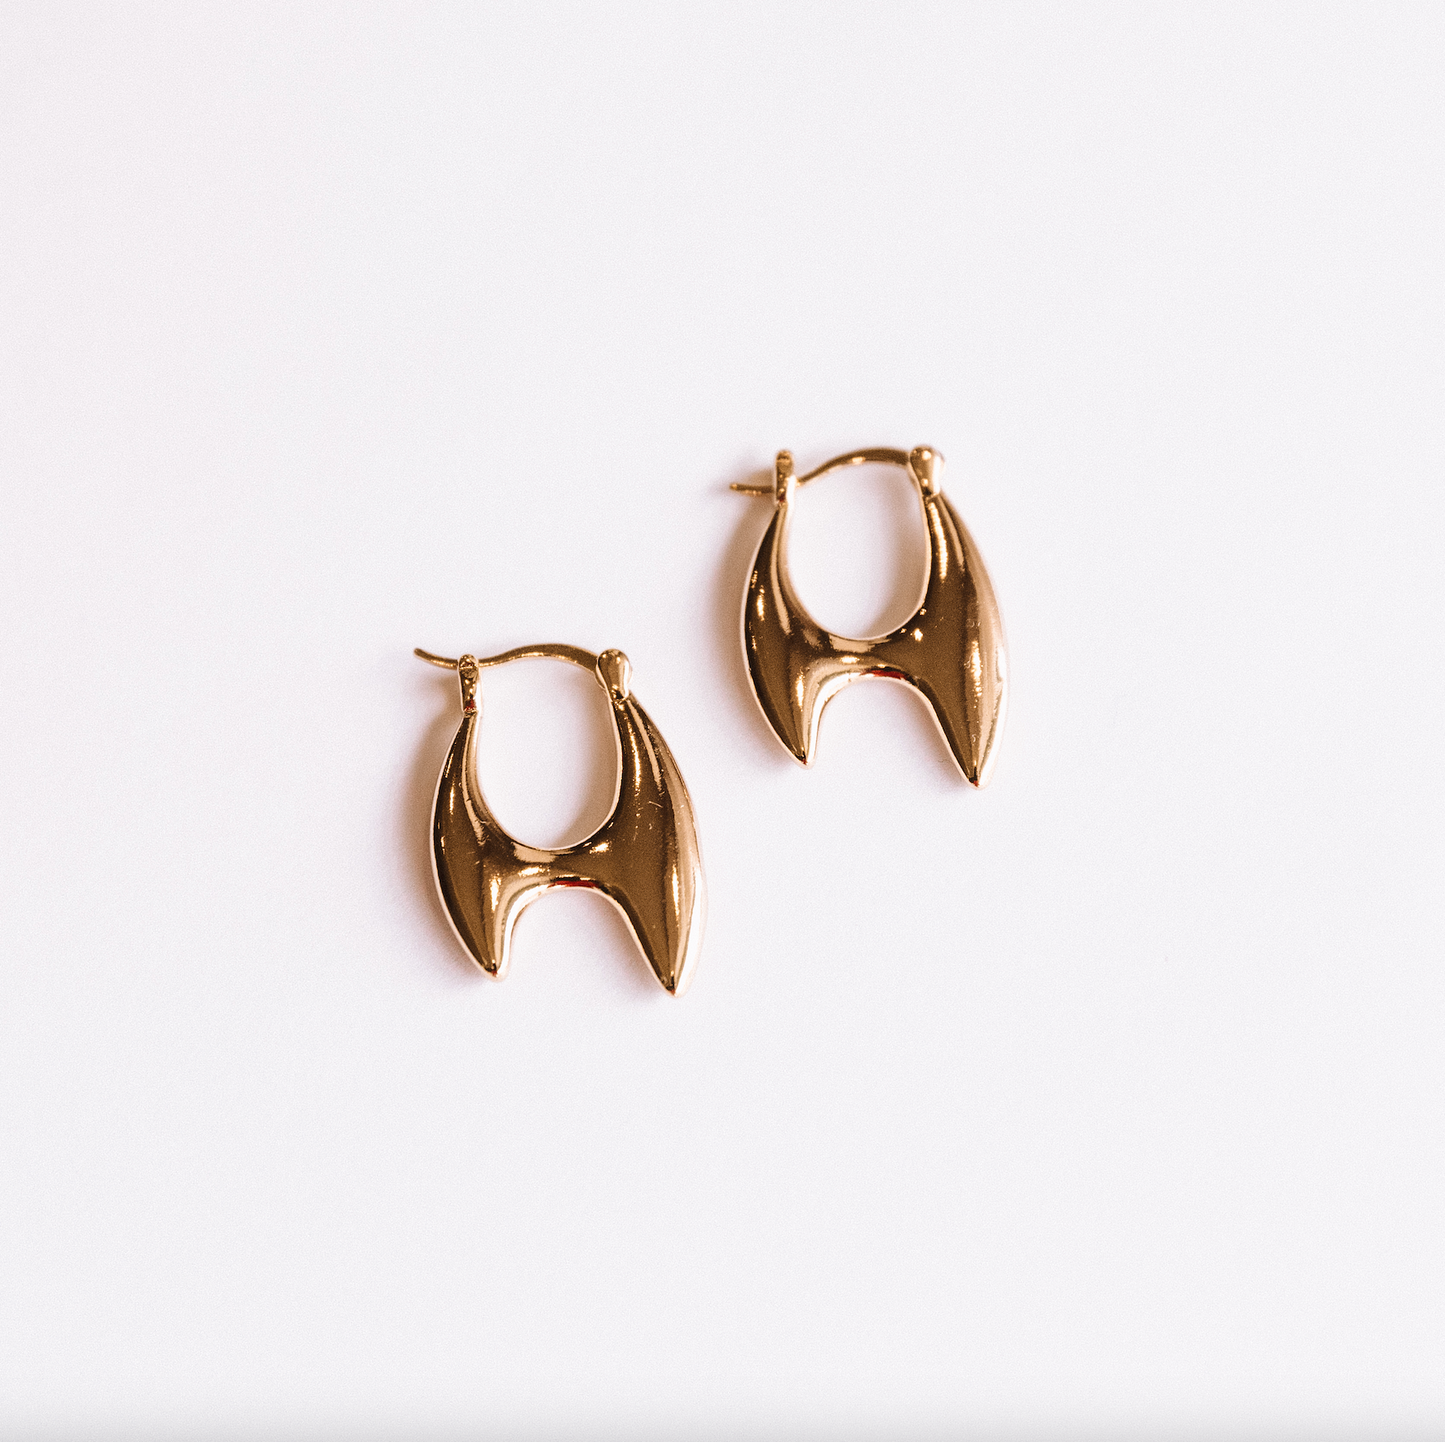 The Double Spike Hoops